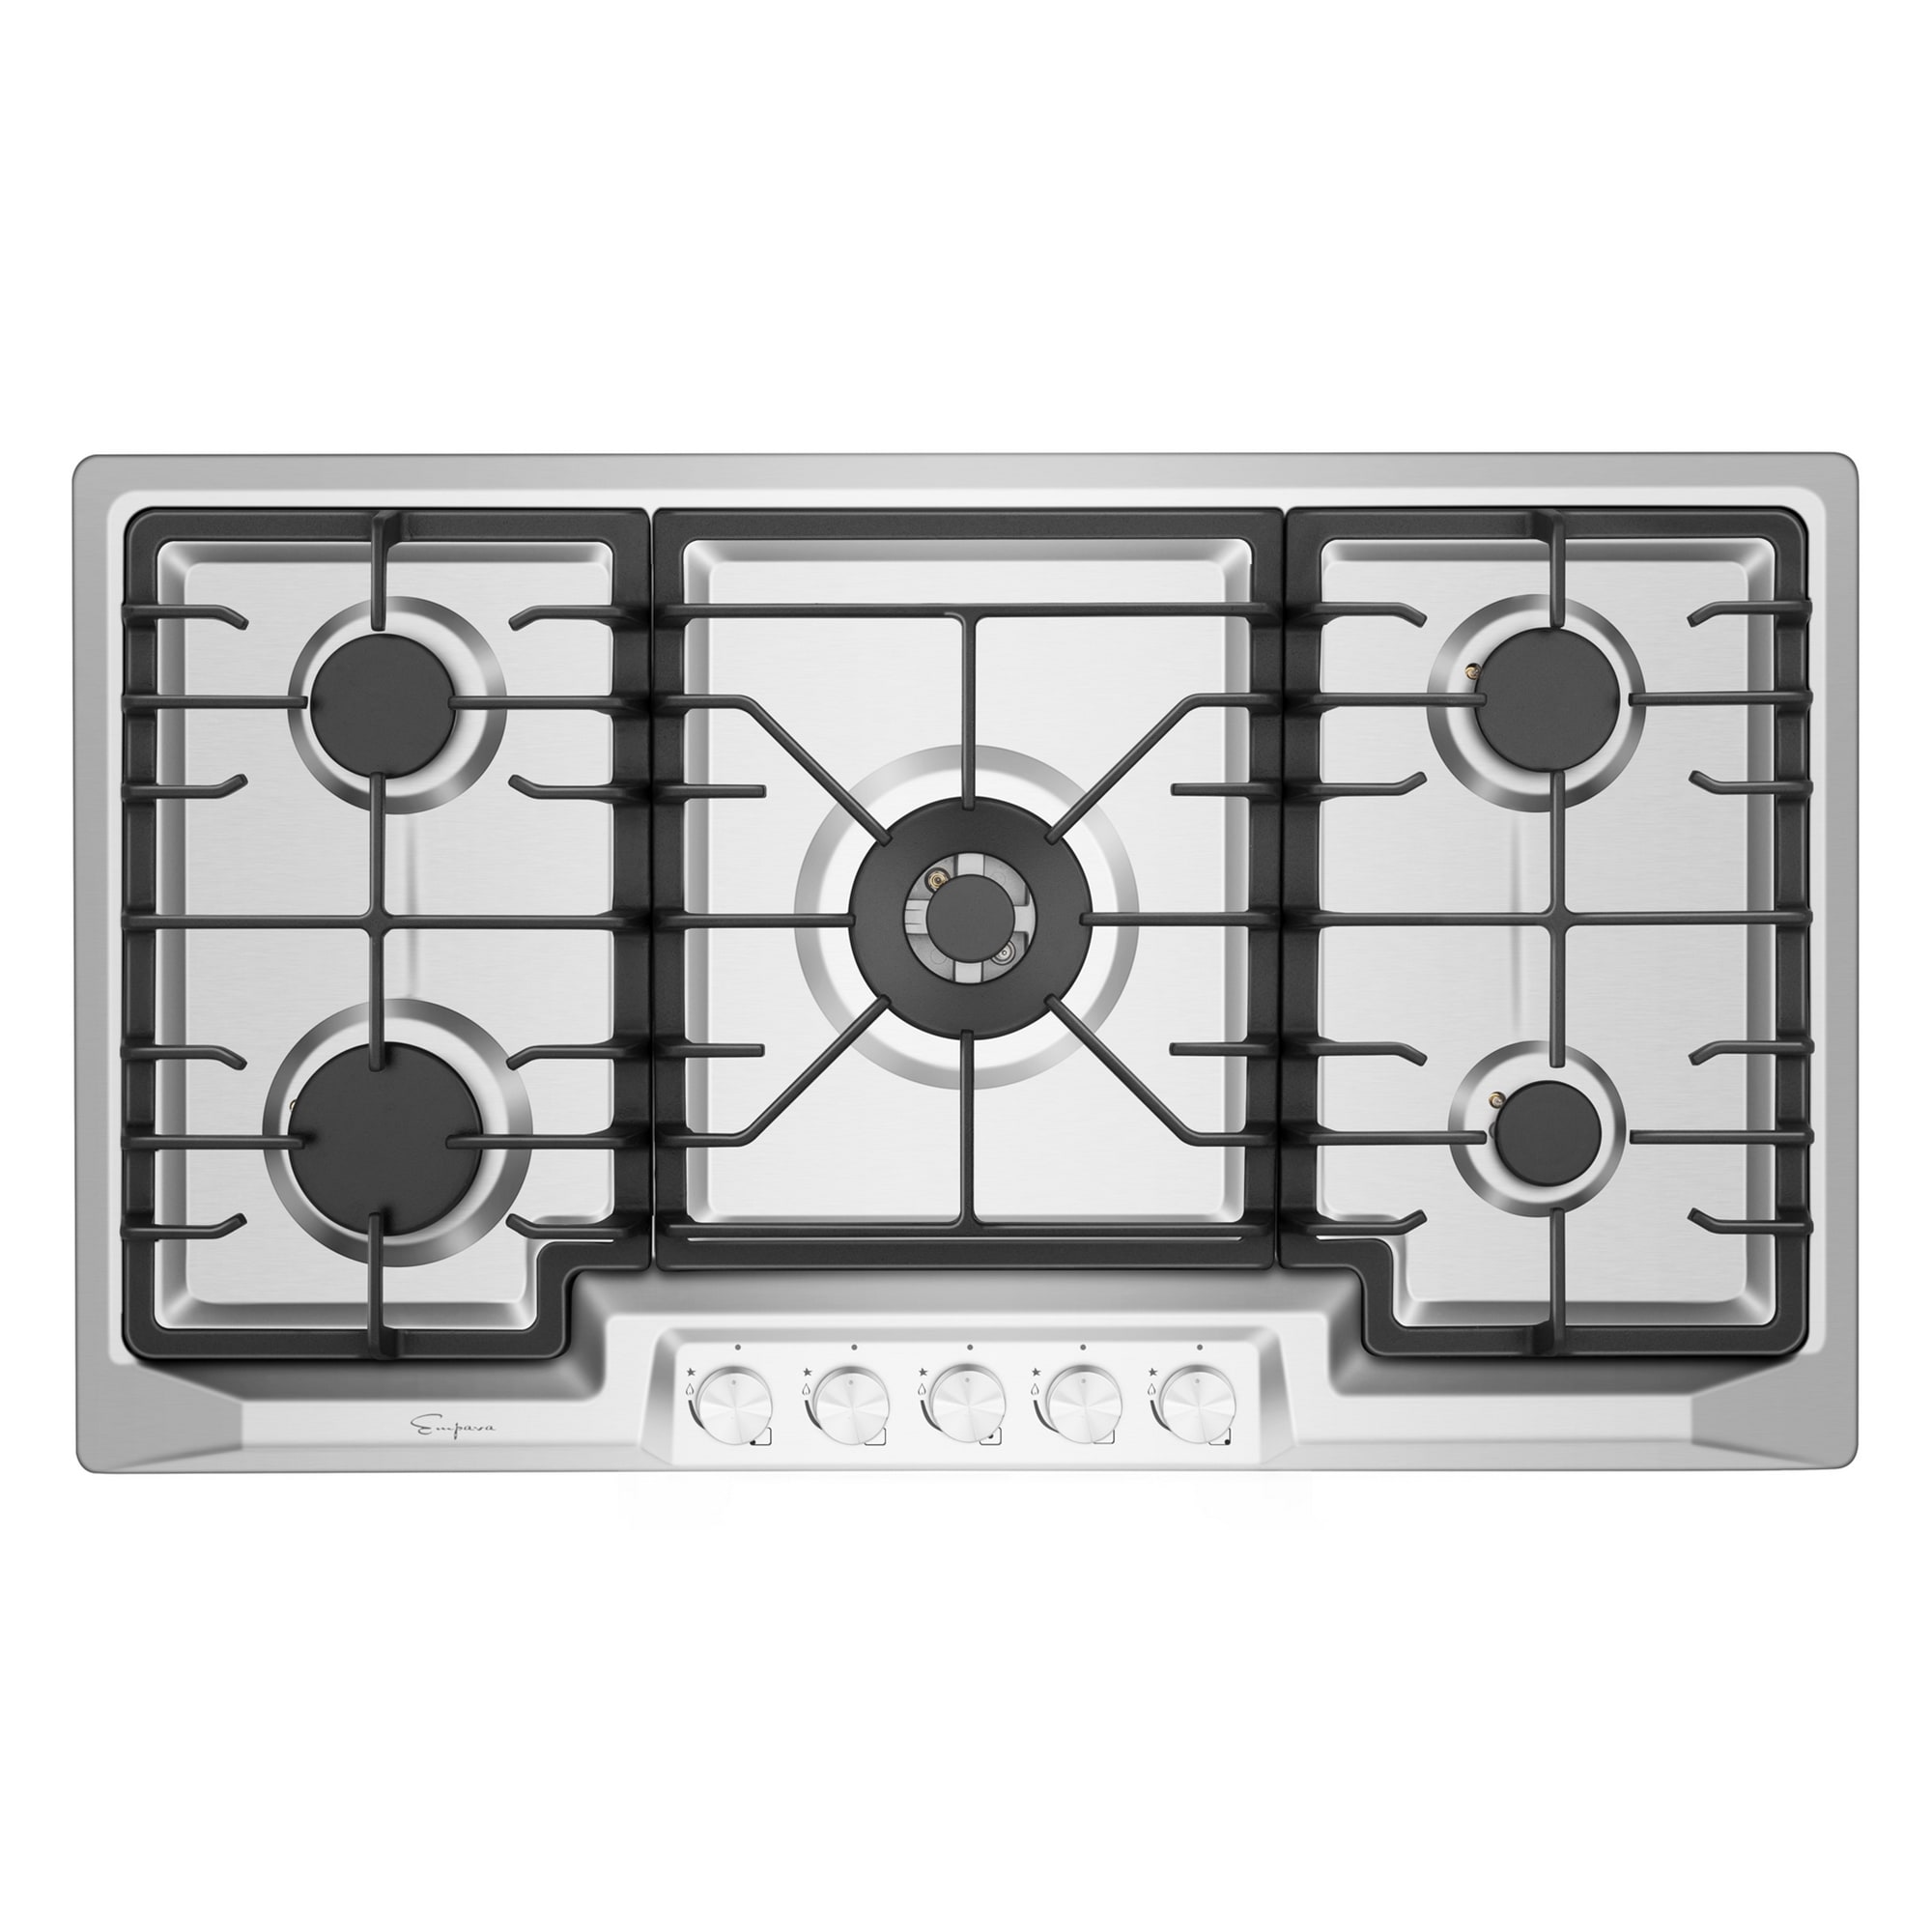 Dual Burner Stainless Steel Gas Stovetop with Thermocouple Protection,120V AC. 12 inch NG/LPG Convertible 12 Built-in Gas Cooktop,2 Italy SABAF Sealed Burners Gas Rangetop 18,000BTU 